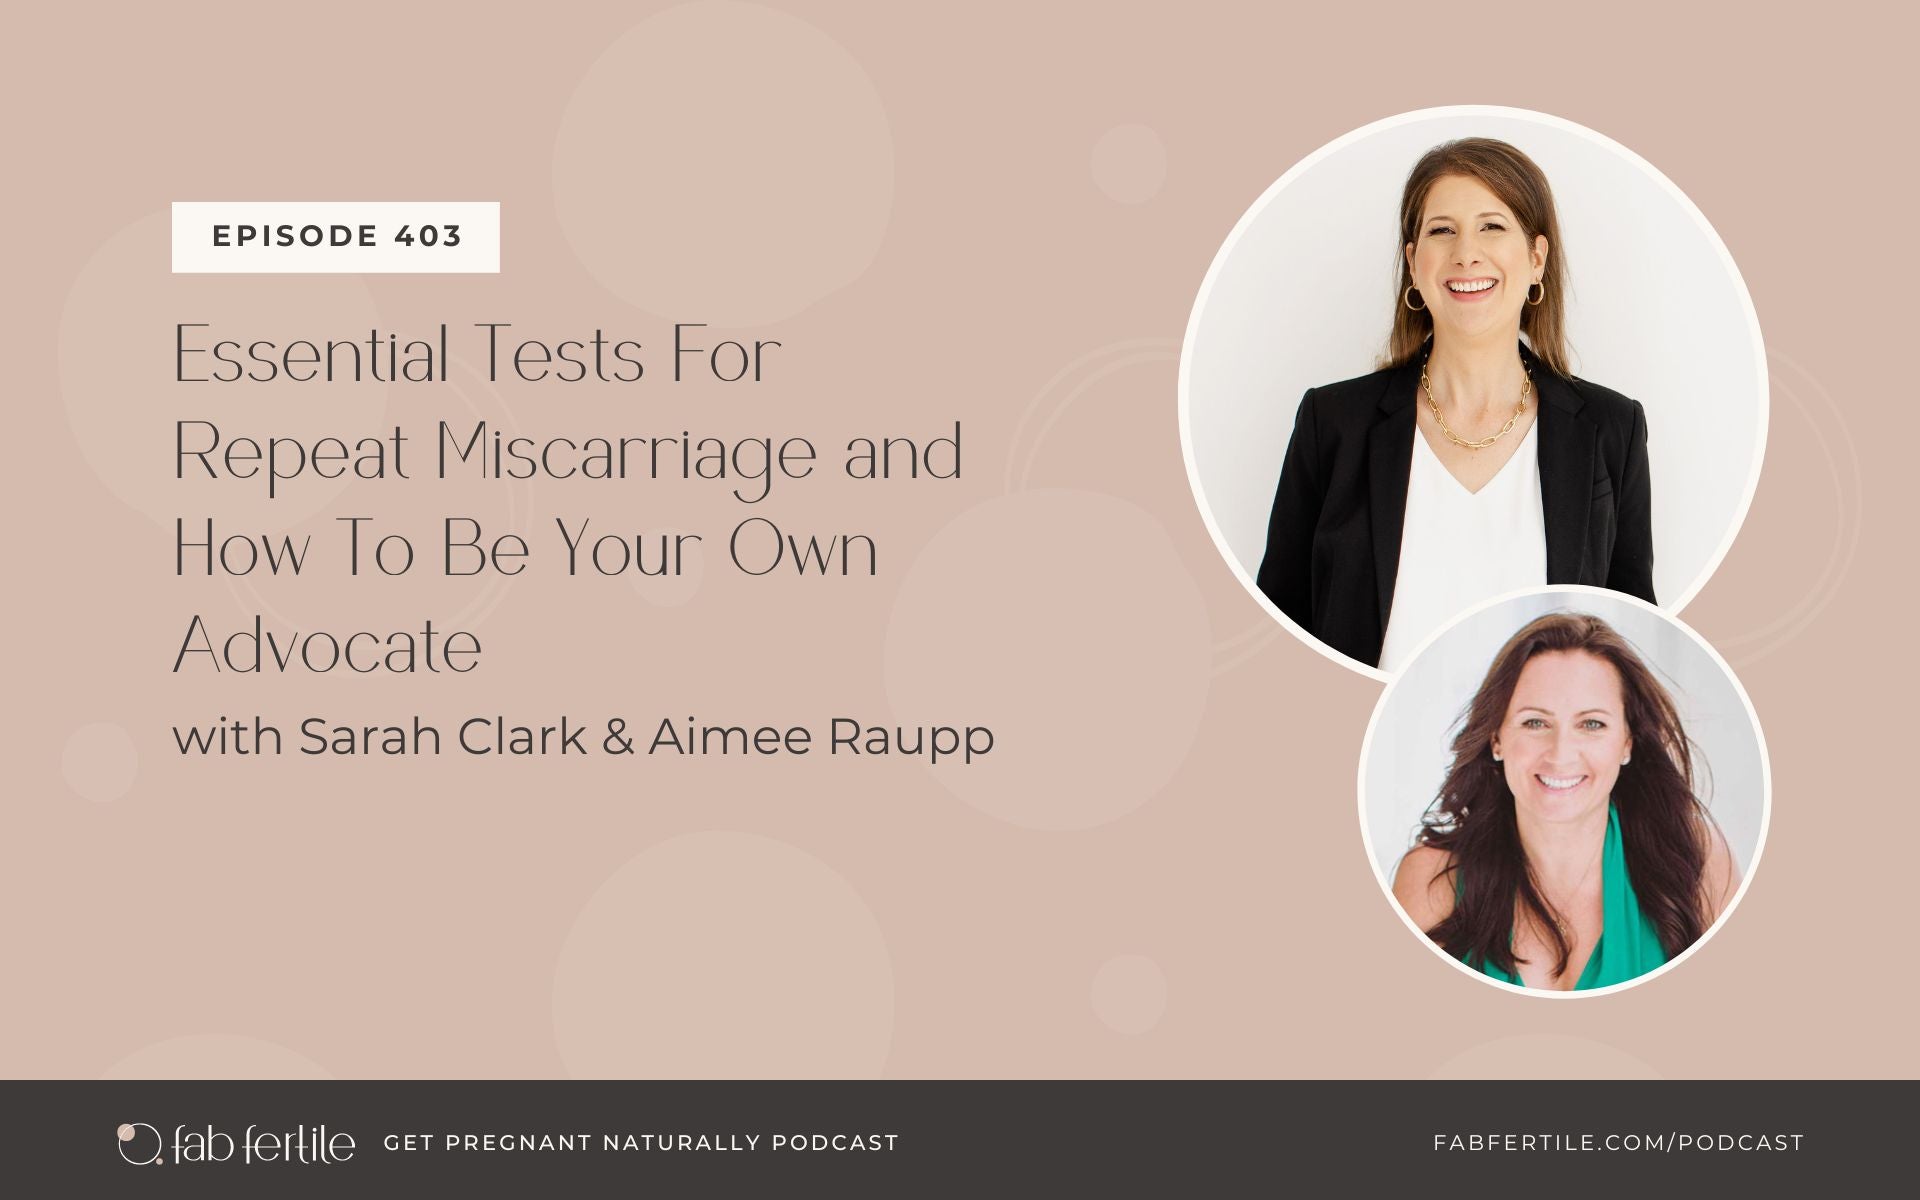 Essential Tests For Repeat Miscarriage and How To Be Your Own Advocate